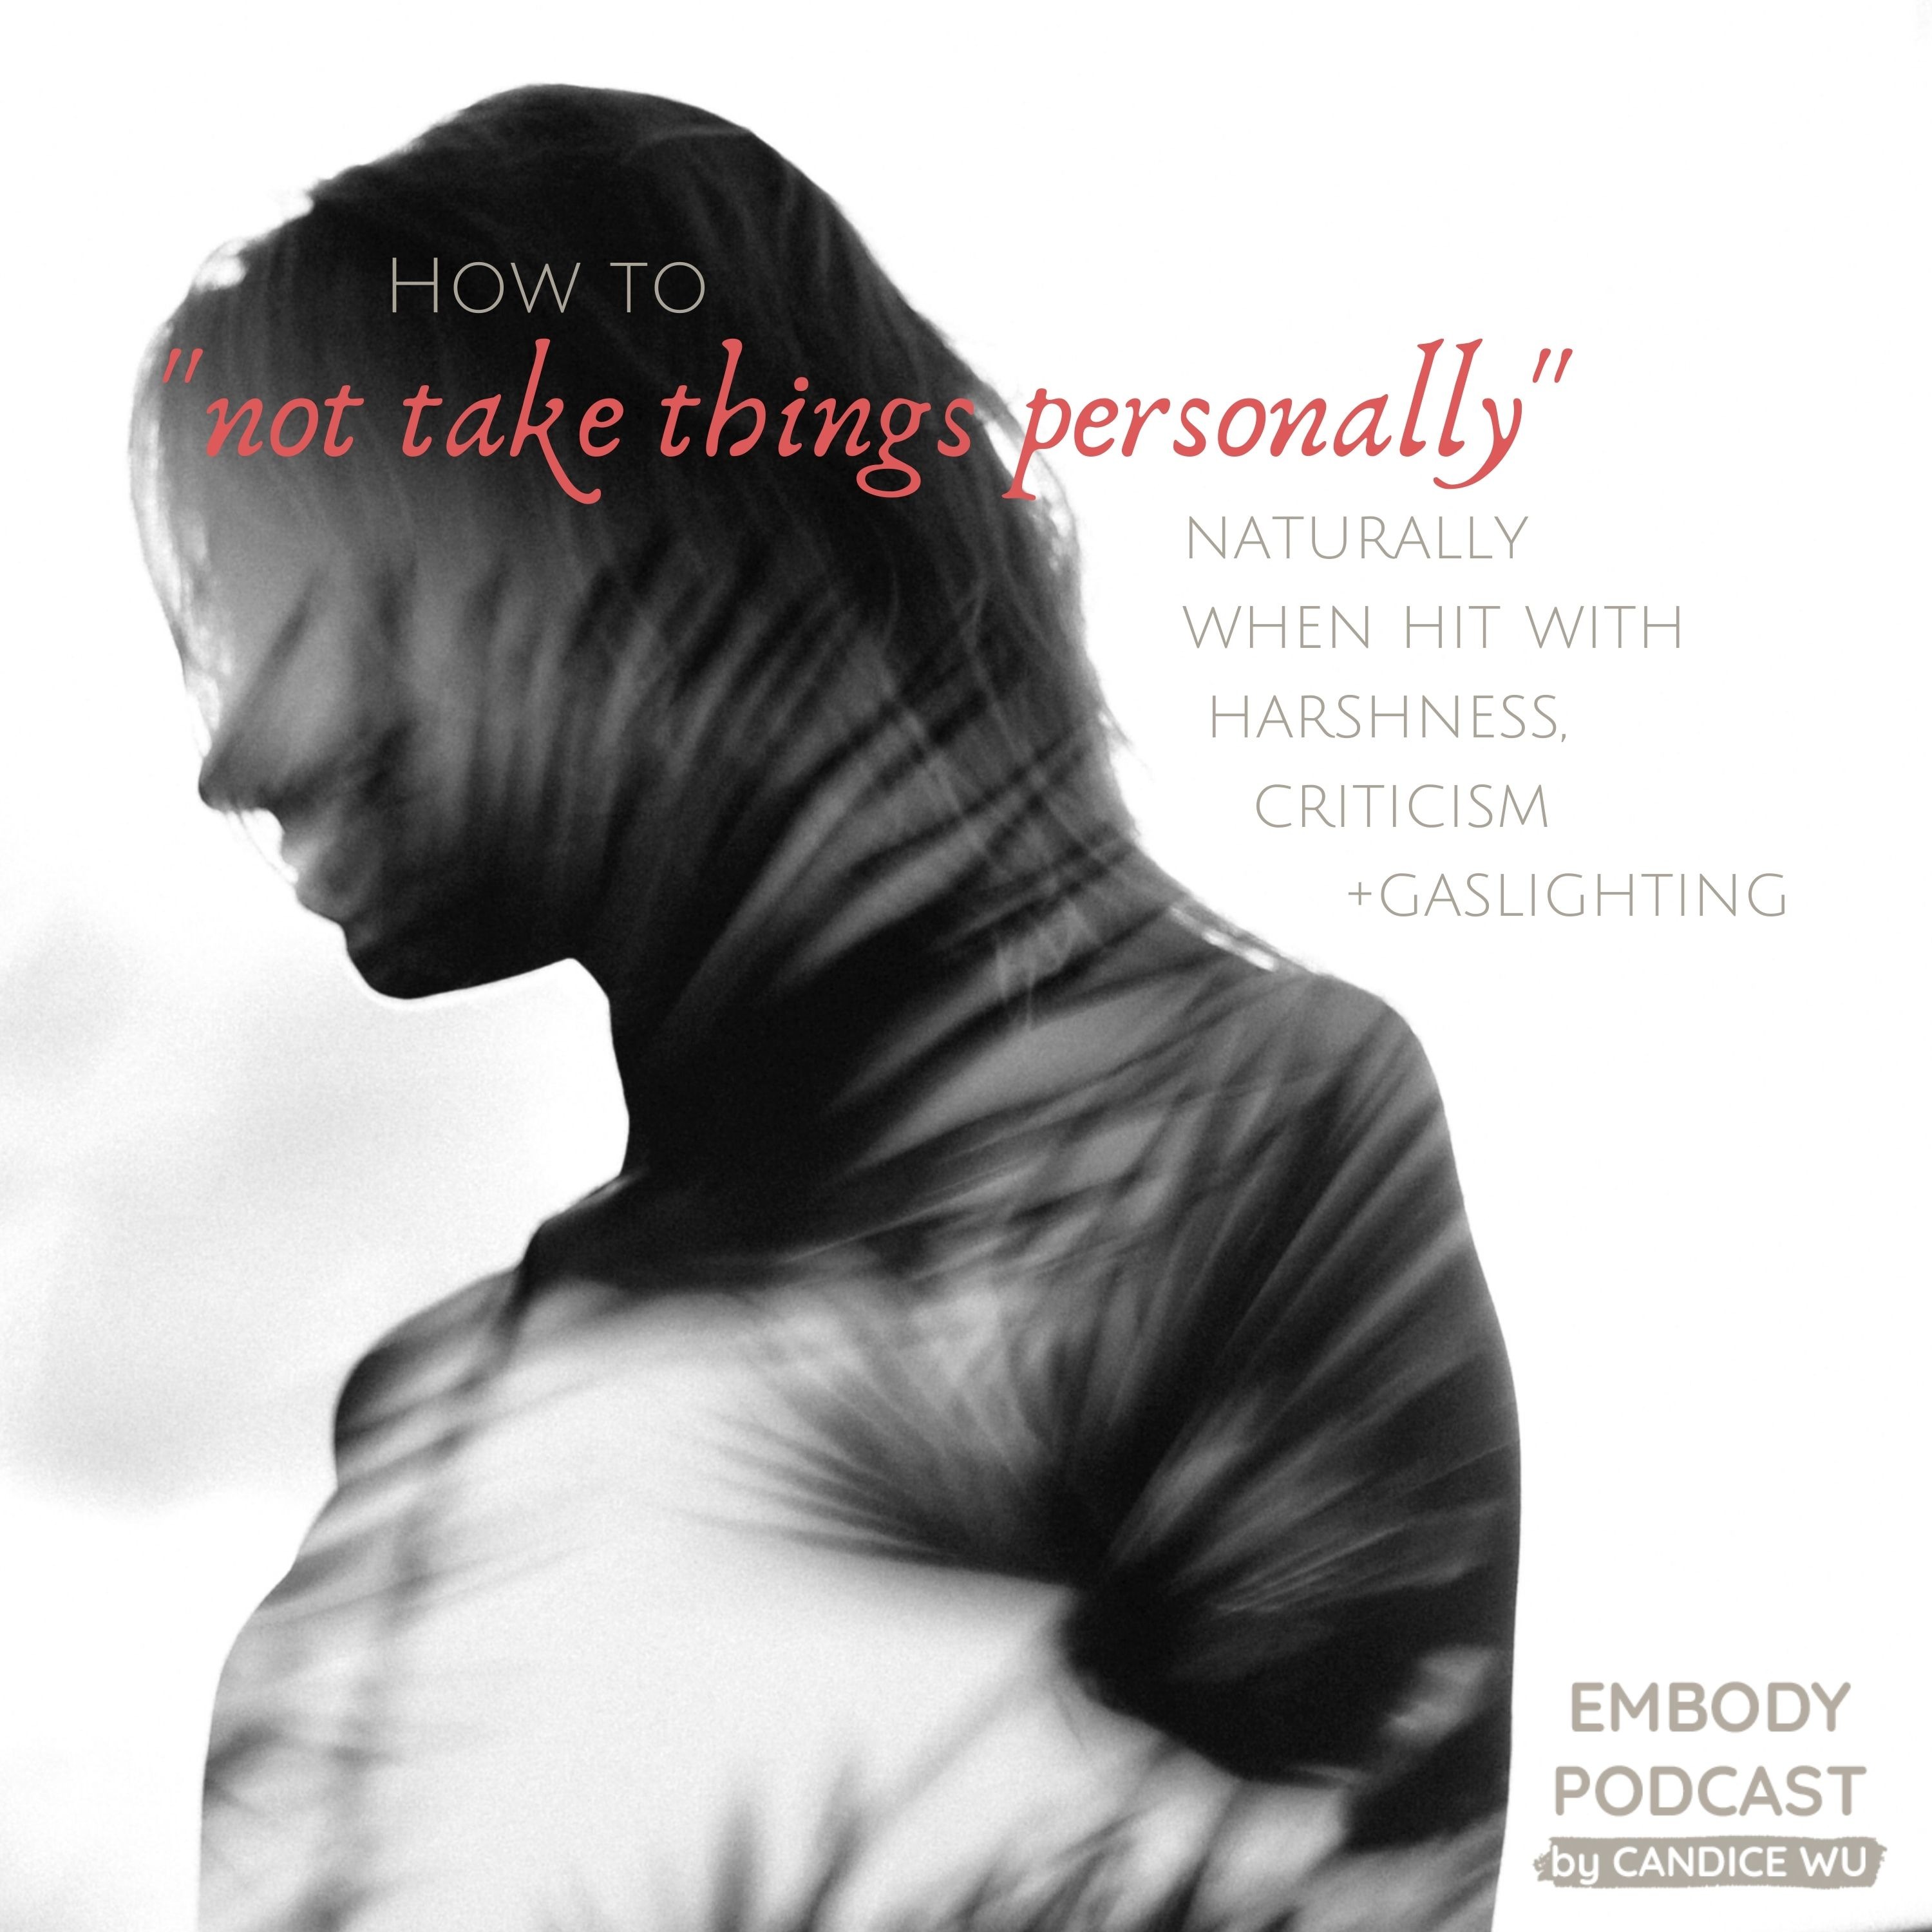 131: How to “Not Take Things Personally” Naturally When Hit With Harshness, Criticism + Gaslighting